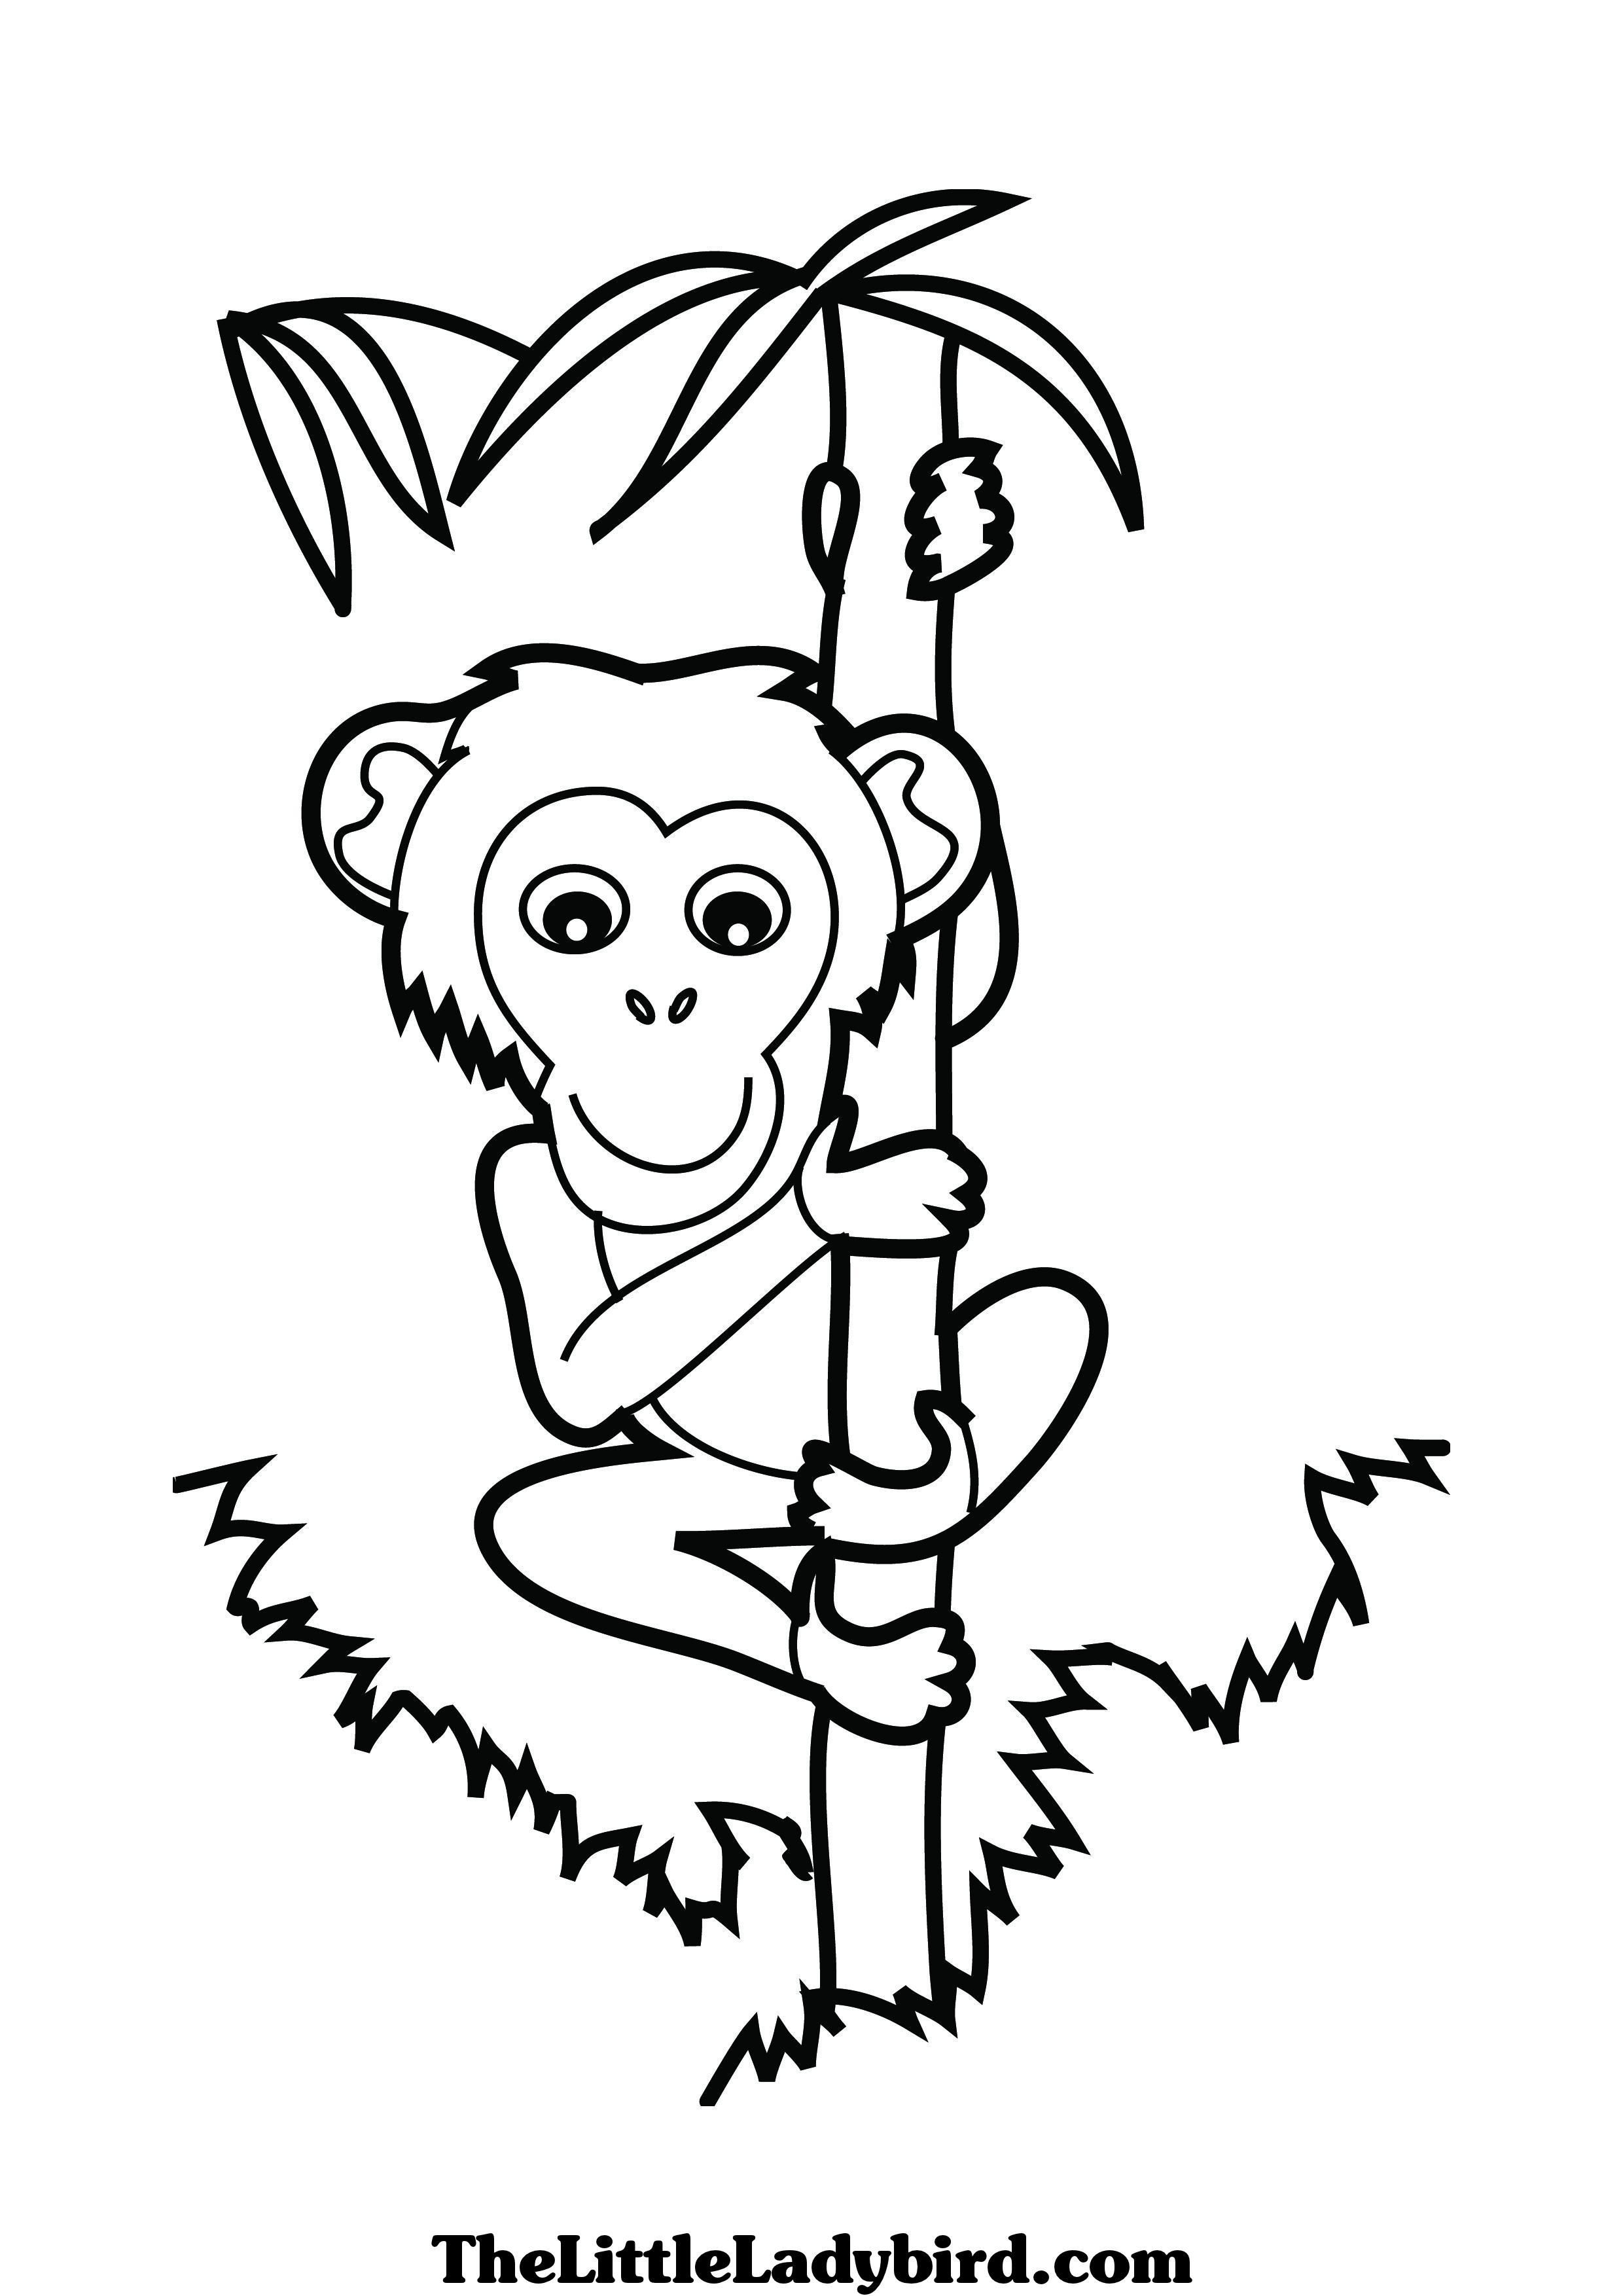 Chimpanzee Coloring Pages Free Chimpanzee Coloring Page Thelittleladybird